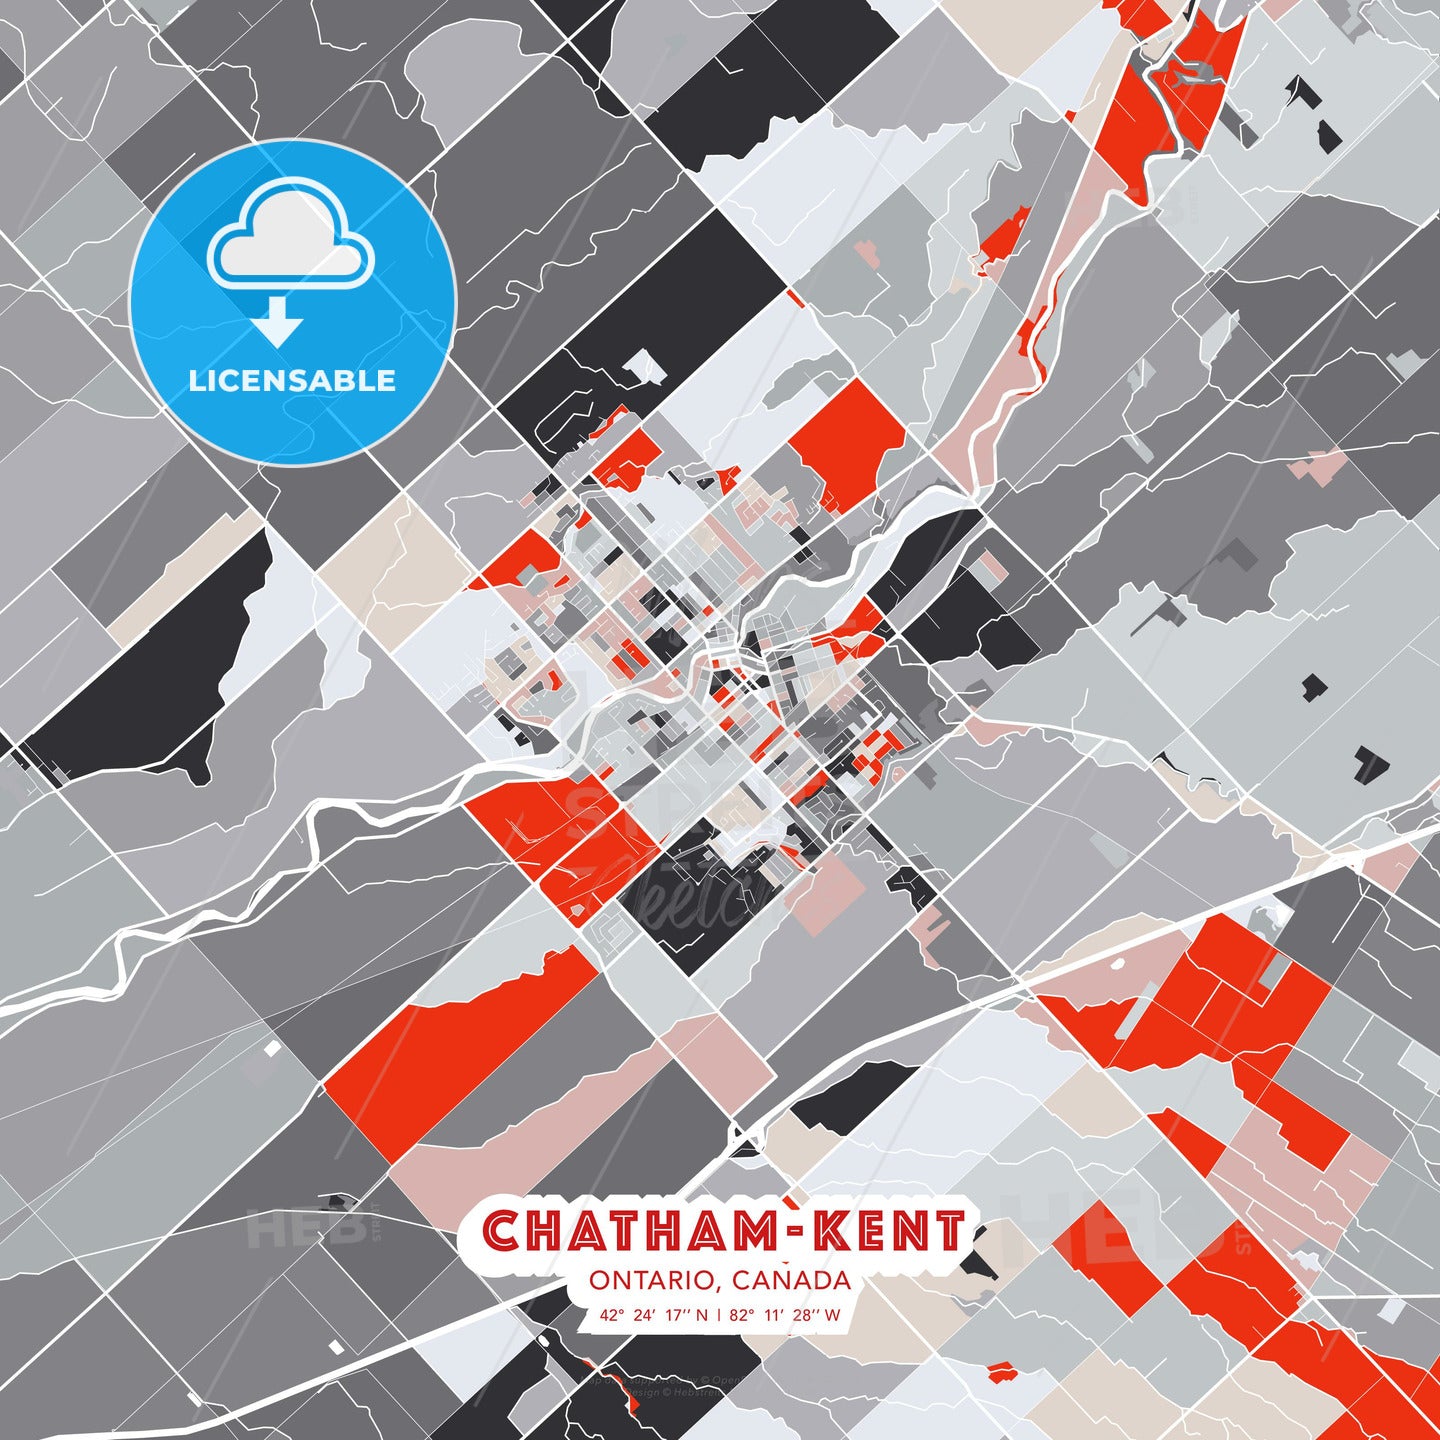 Chatham-Kent, Ontario, Canada, modern map - HEBSTREITS Sketches